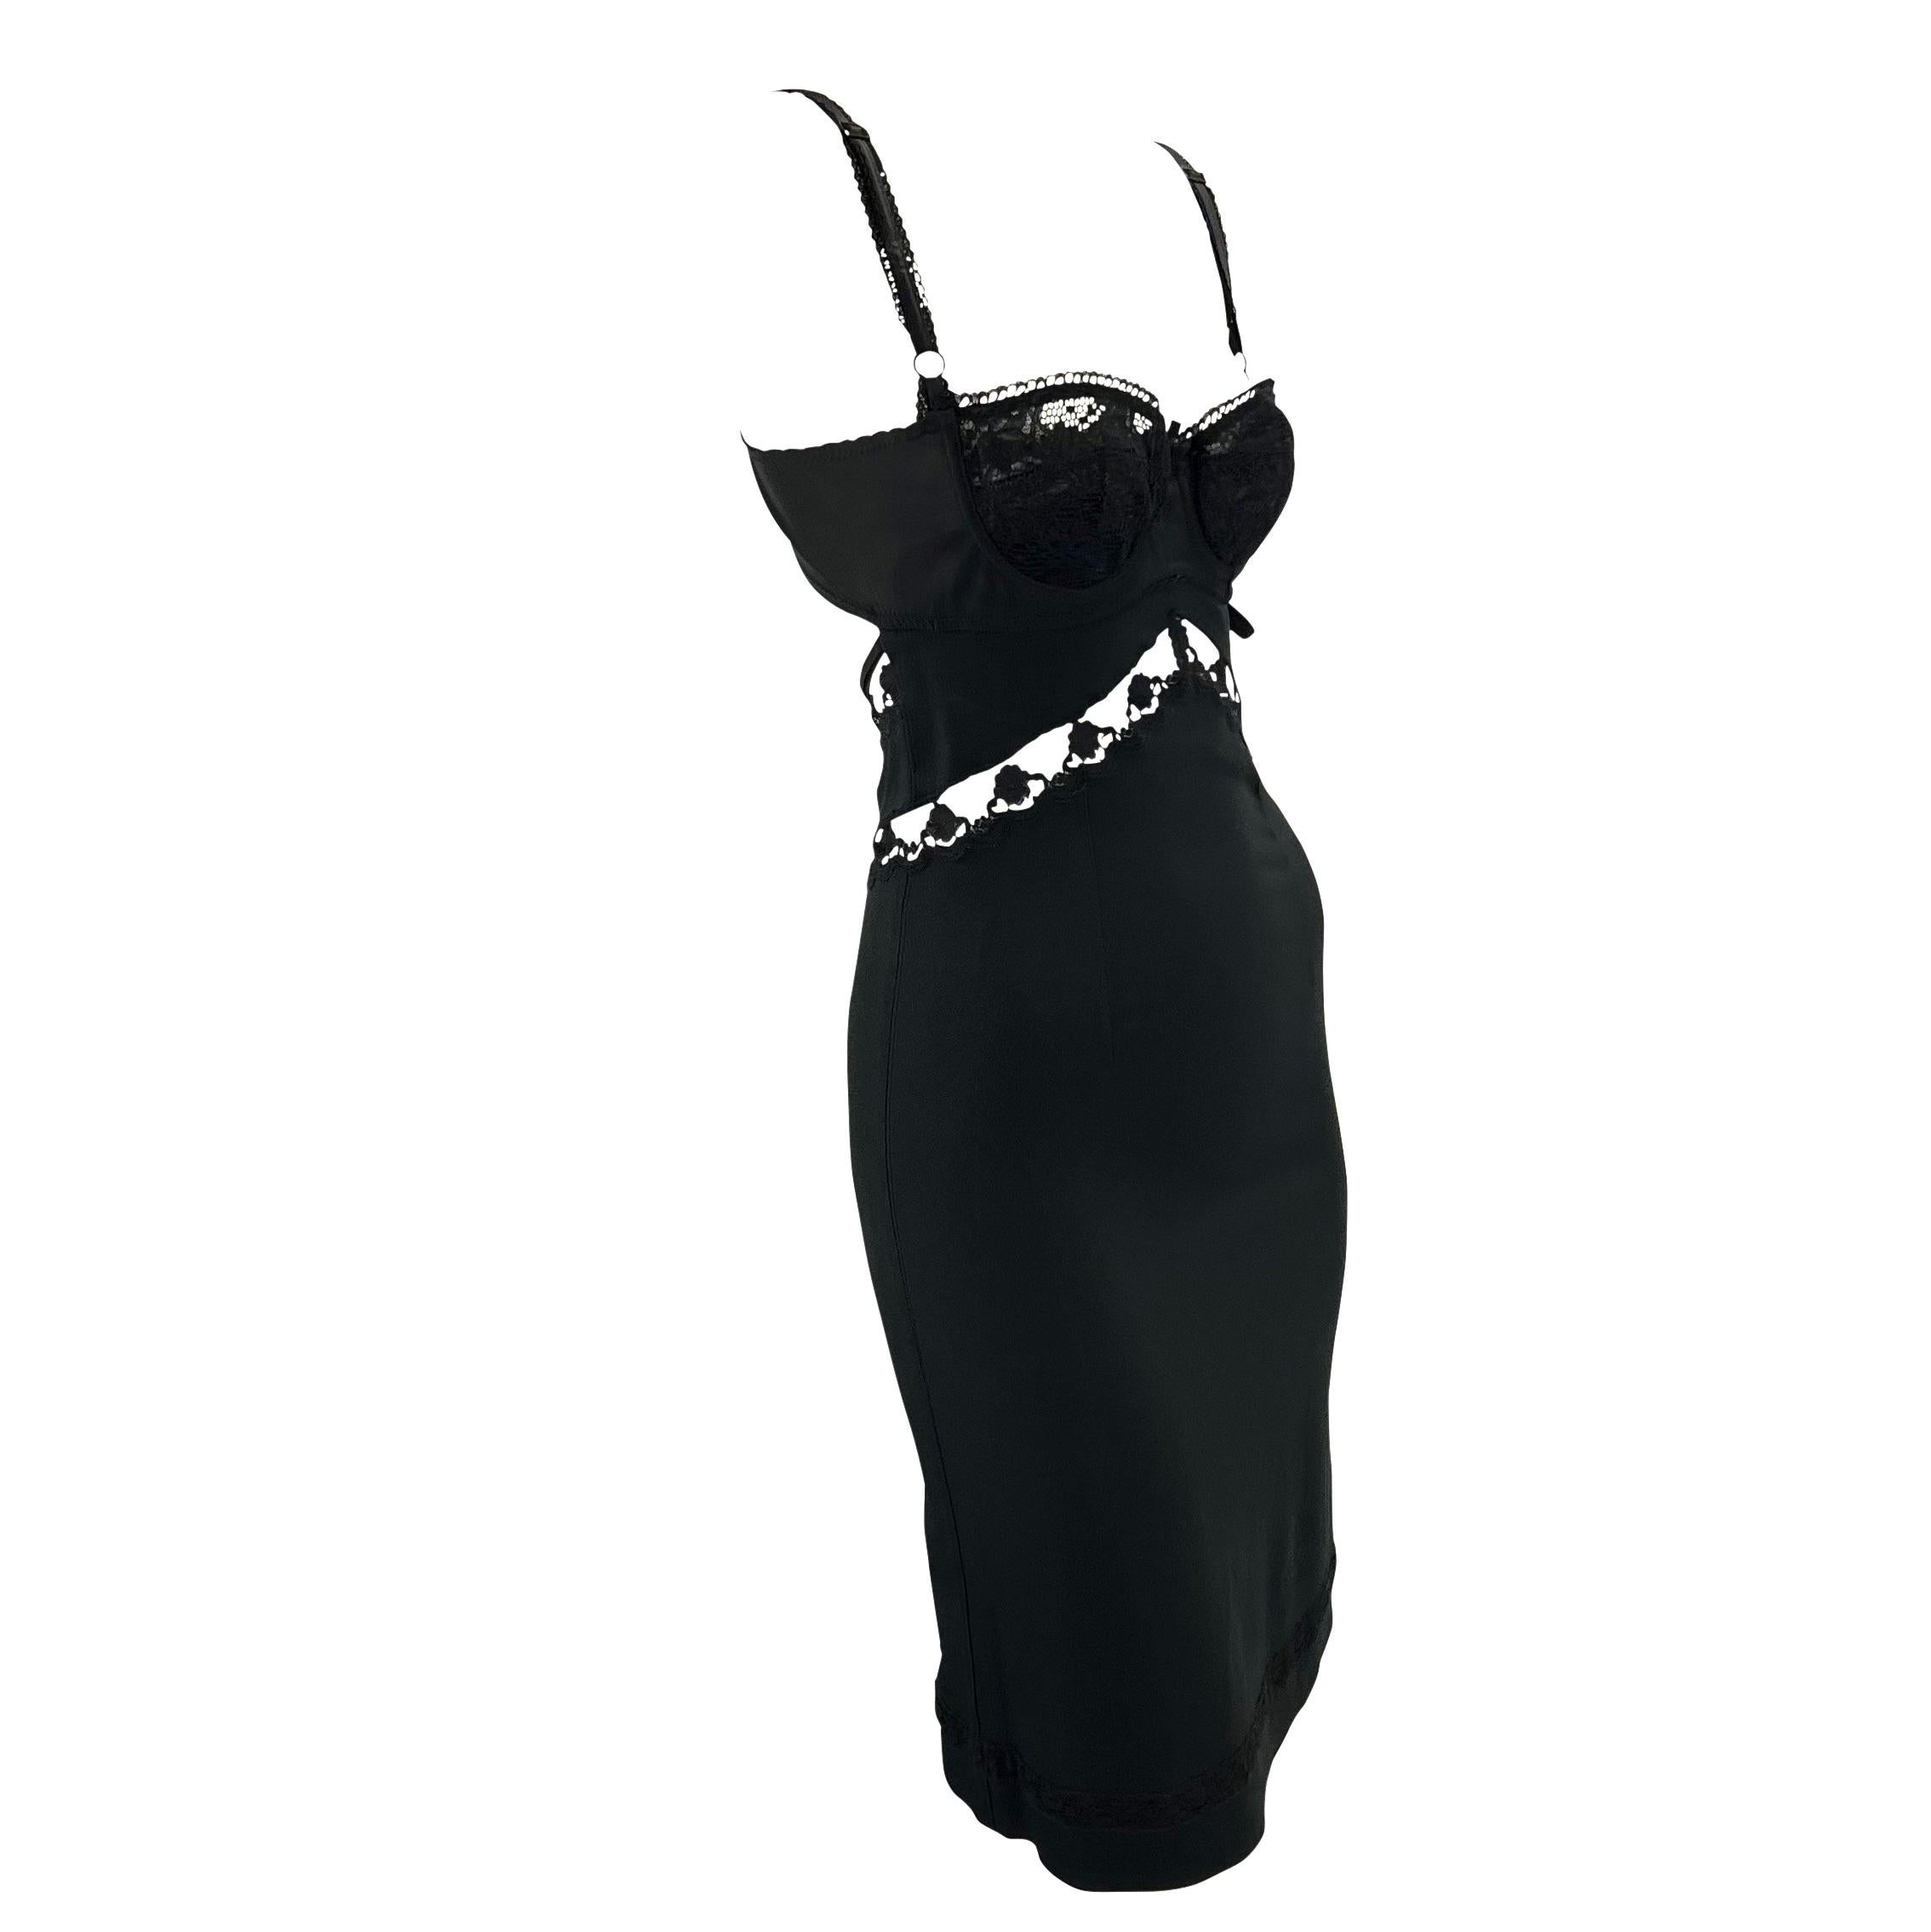 S/S 1997 Dolce & Gabbana Sheer Black Lace Bustier Stretch Cutout Slip Dress In Excellent Condition For Sale In West Hollywood, CA